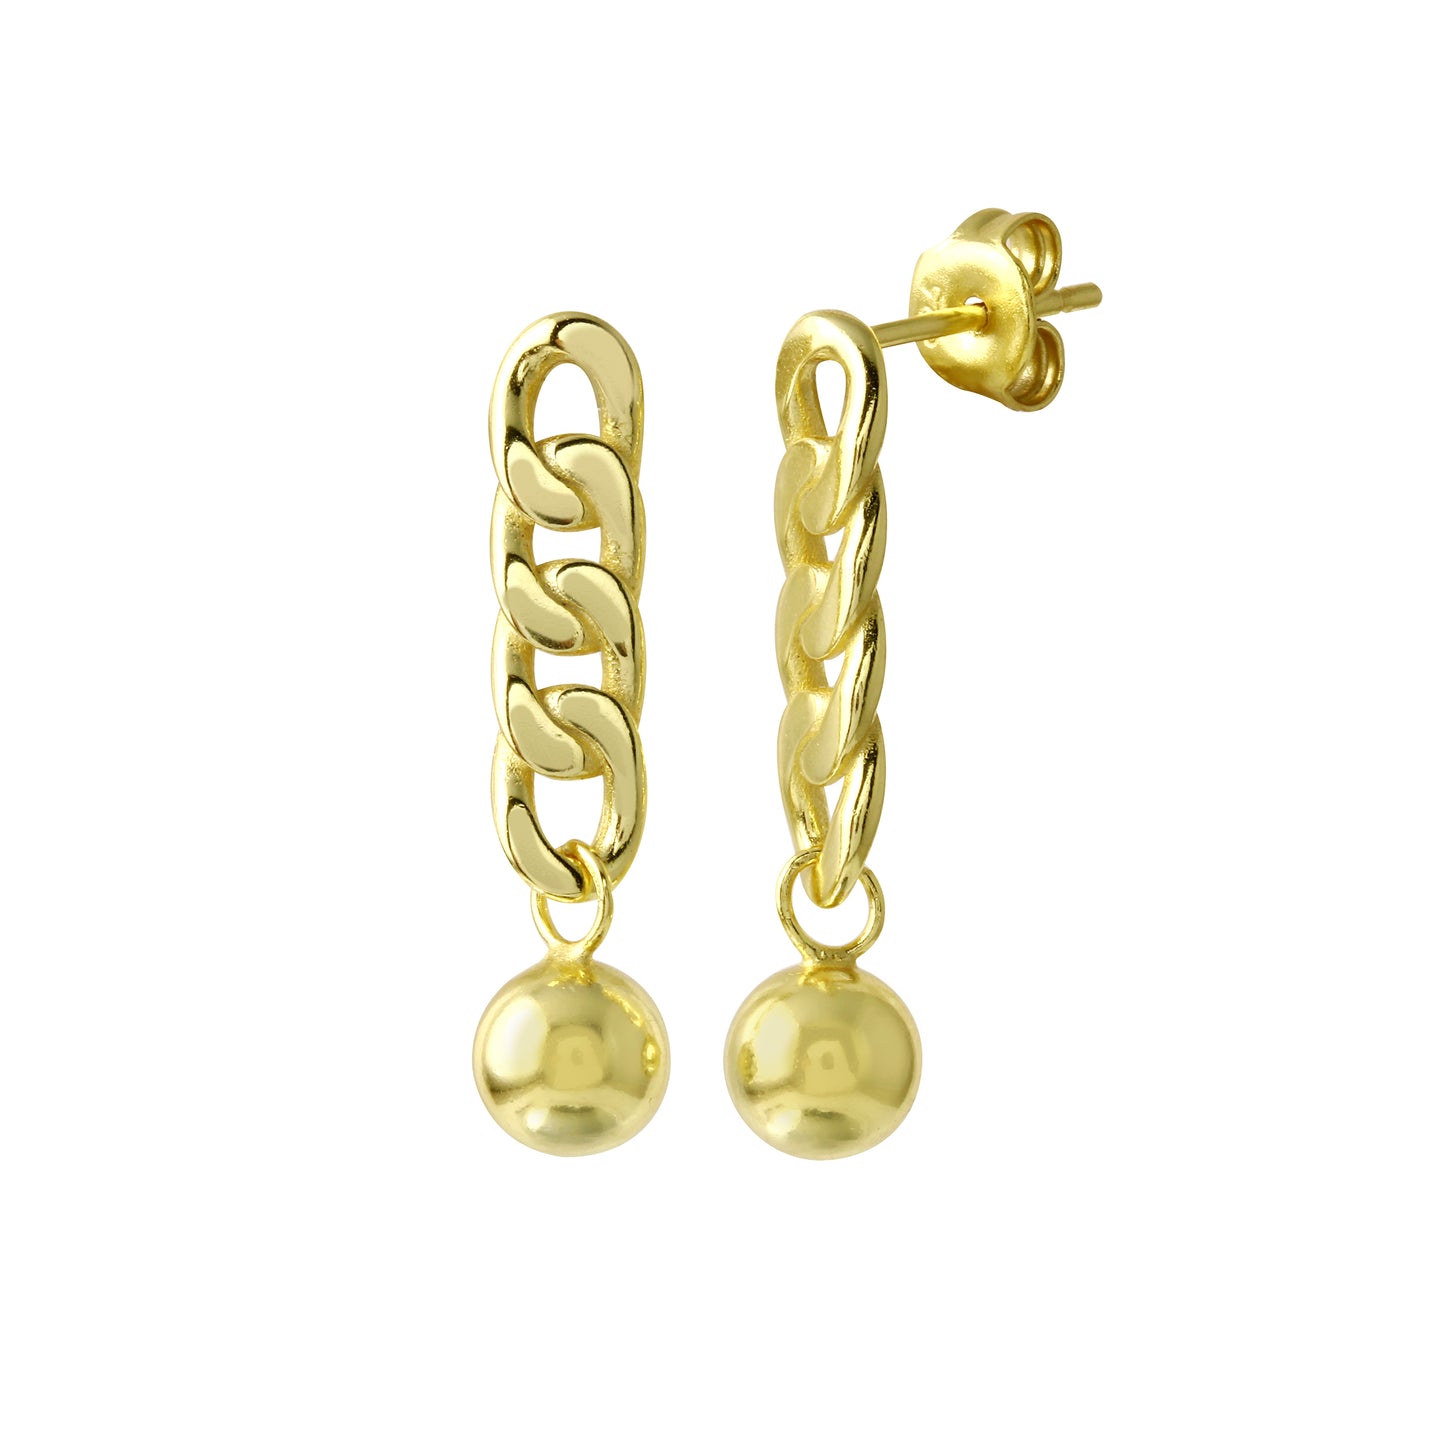 Curb with ball Stud earrings